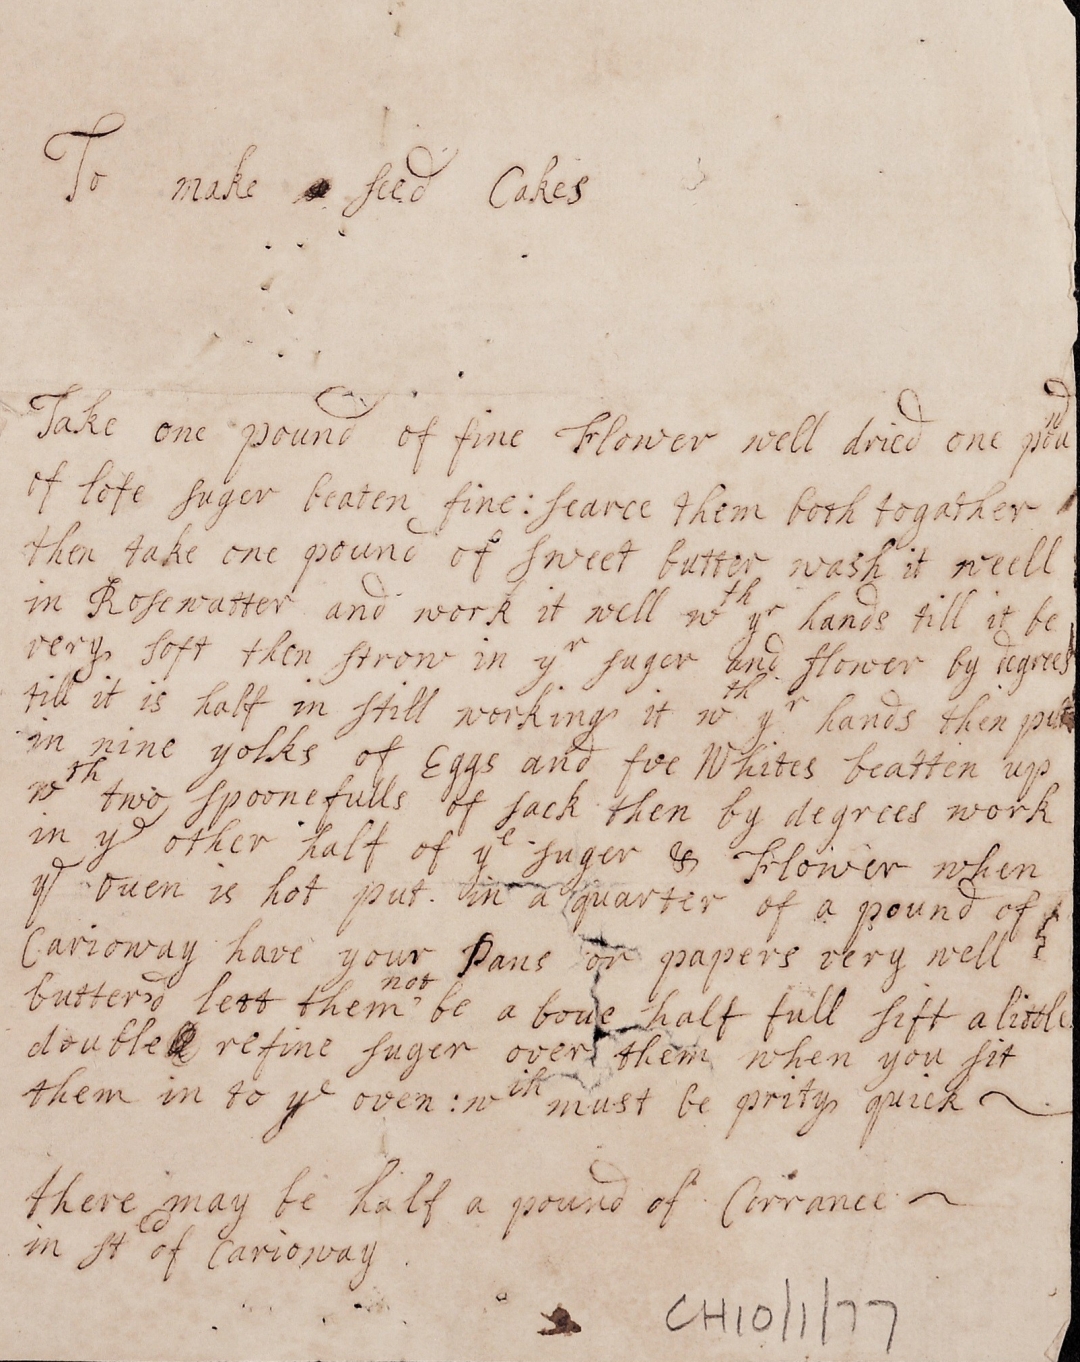 Recipe for seed cakes. Reproduced with kind permission of the Religious Society of Friends (Quakers) in Scotland (National Records of Scotland, CH10/77/1)